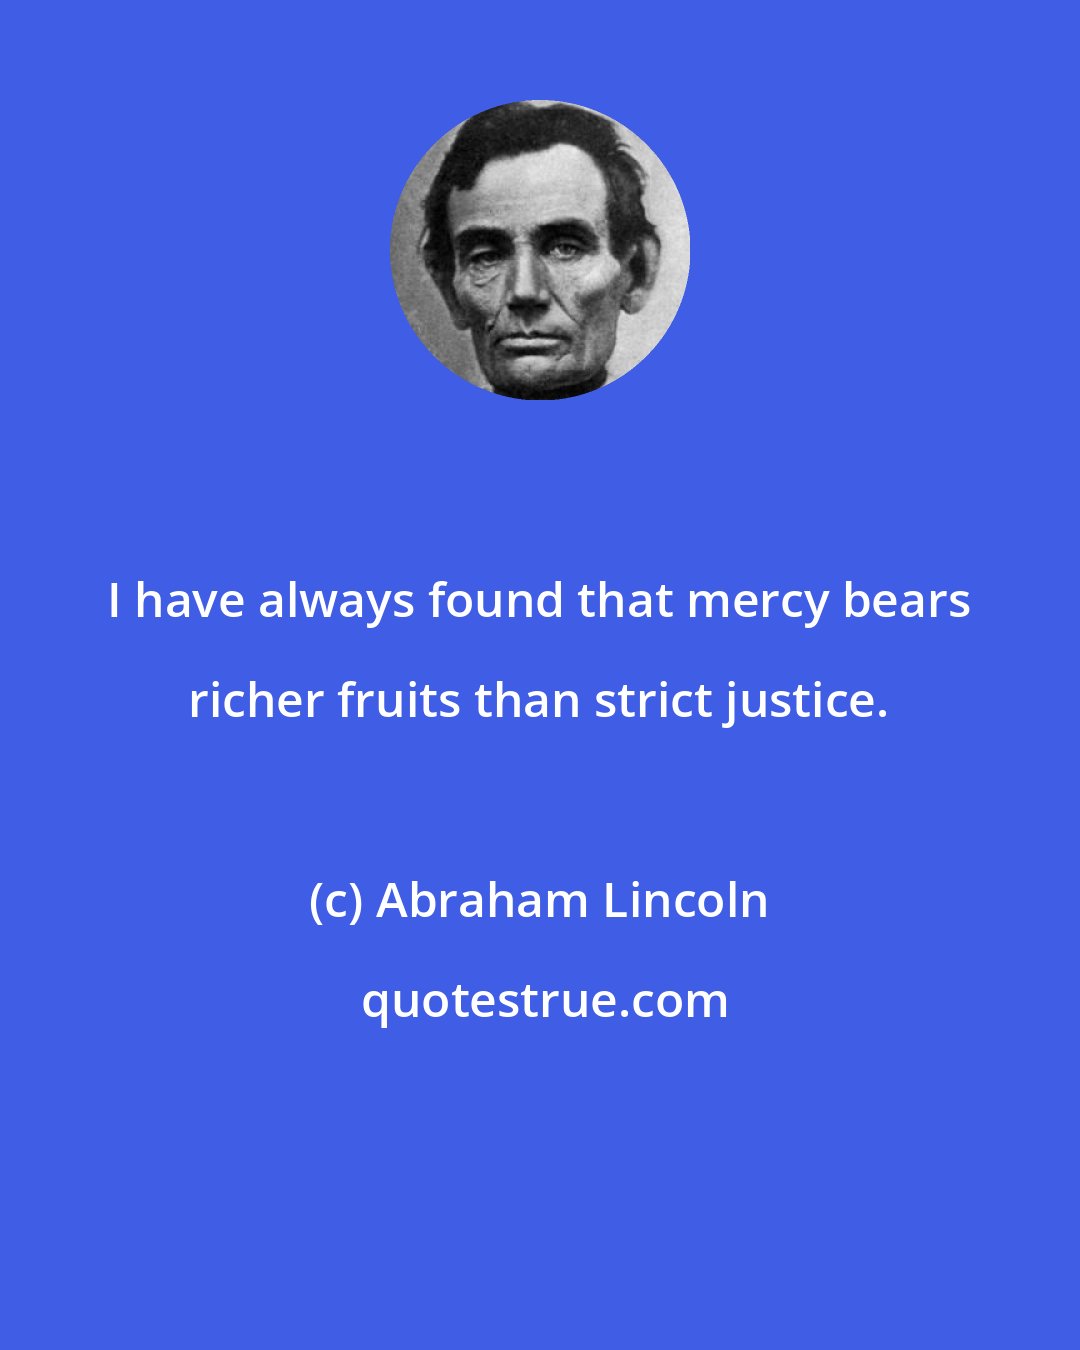 Abraham Lincoln: I have always found that mercy bears richer fruits than strict justice.